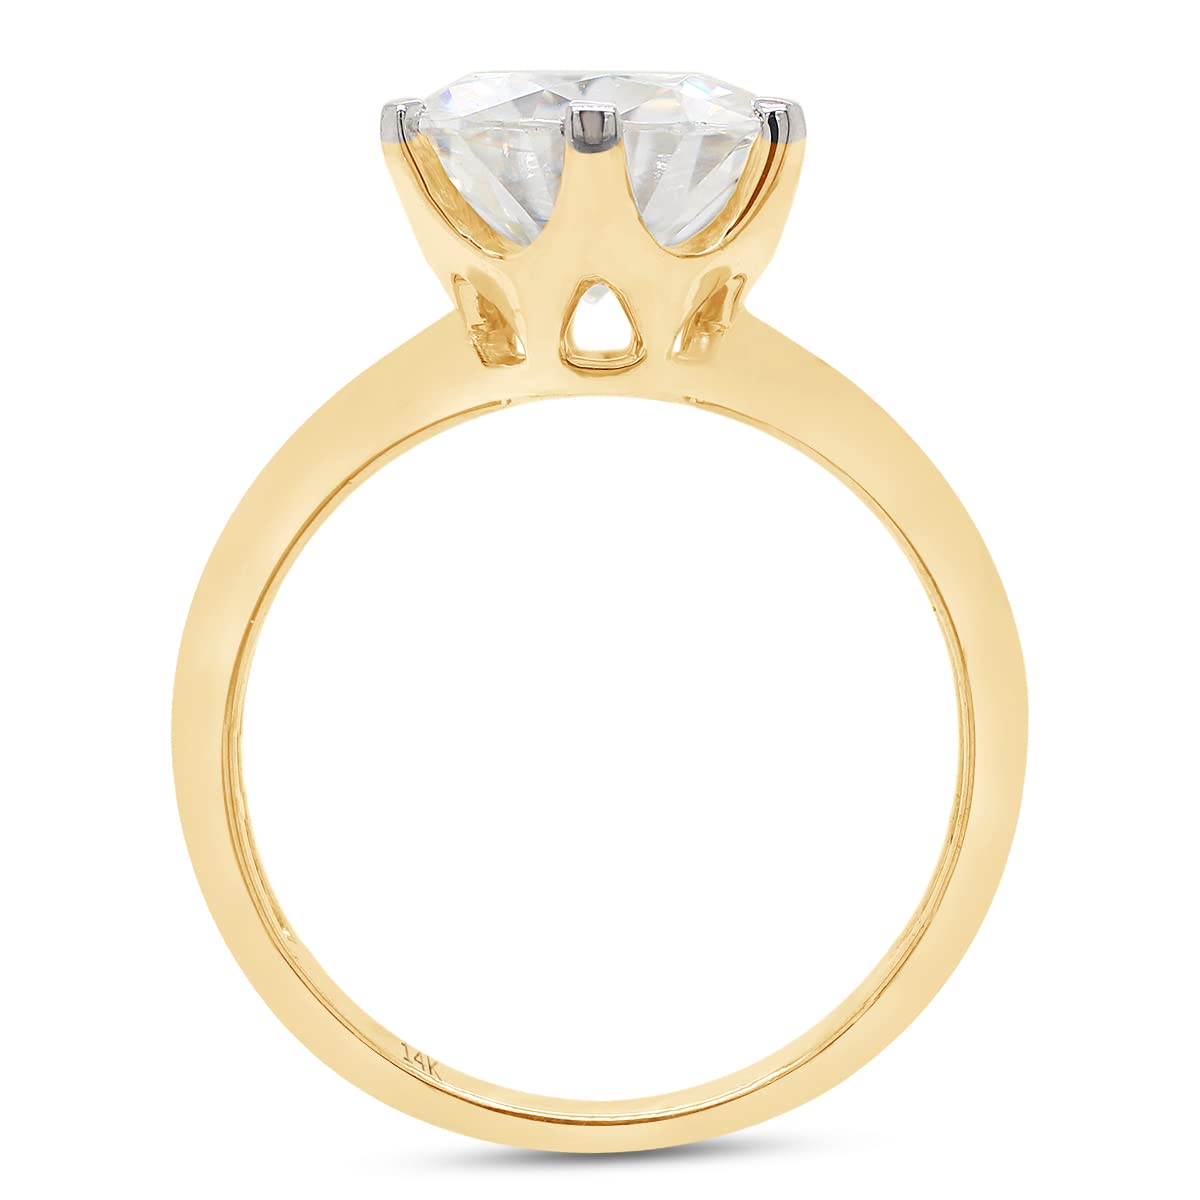 3 Carat 9.5MM Round Cut Lab Created Moissanite Diamond Solitaire Engagement Ring for Women in 10K or 14K Solid Gold